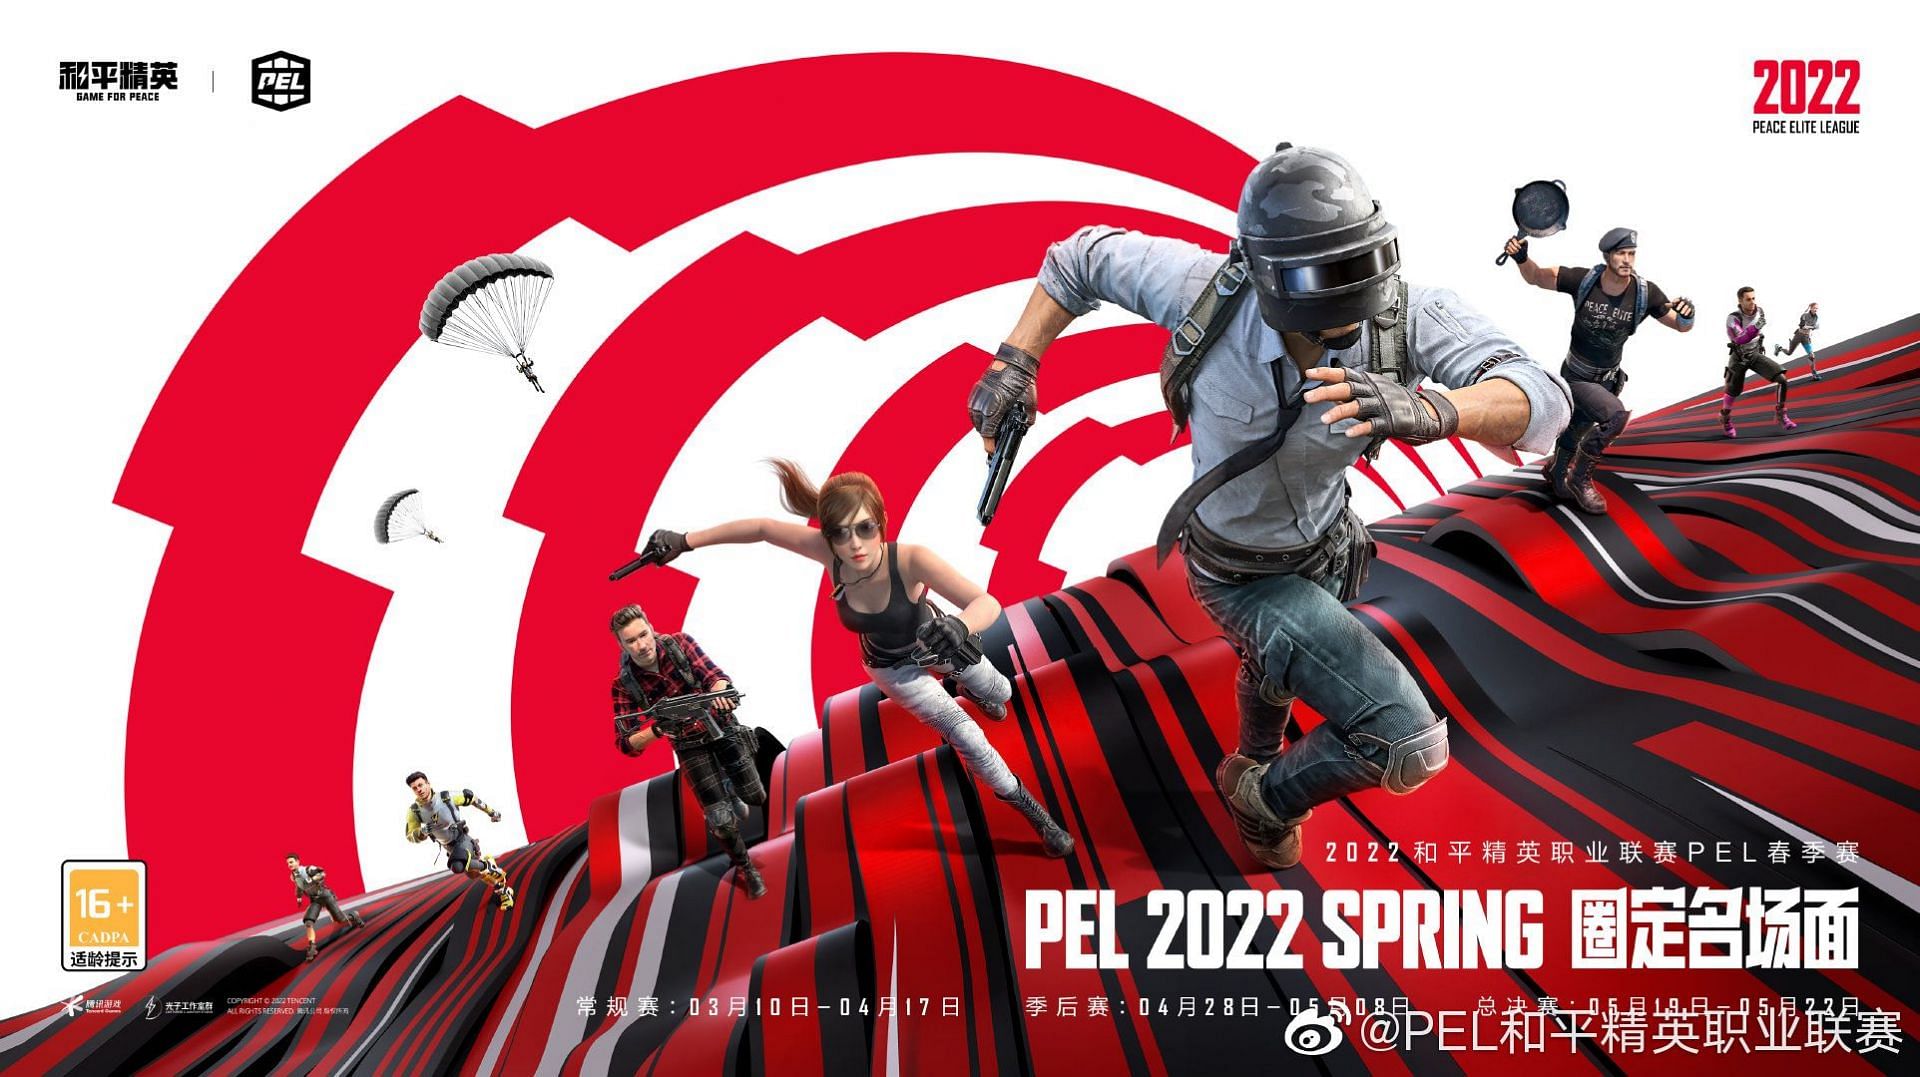 Peacekeeper Elite League 2022 Spring Season is all set to begin on March 4 (Image via Tencent)